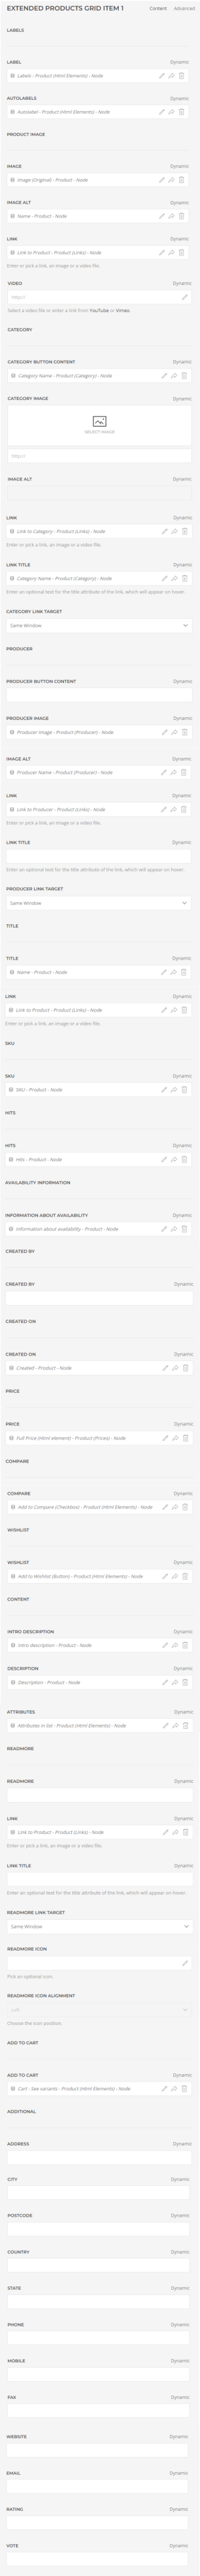 dj-catalog integrator yootheme extended products grid content settings